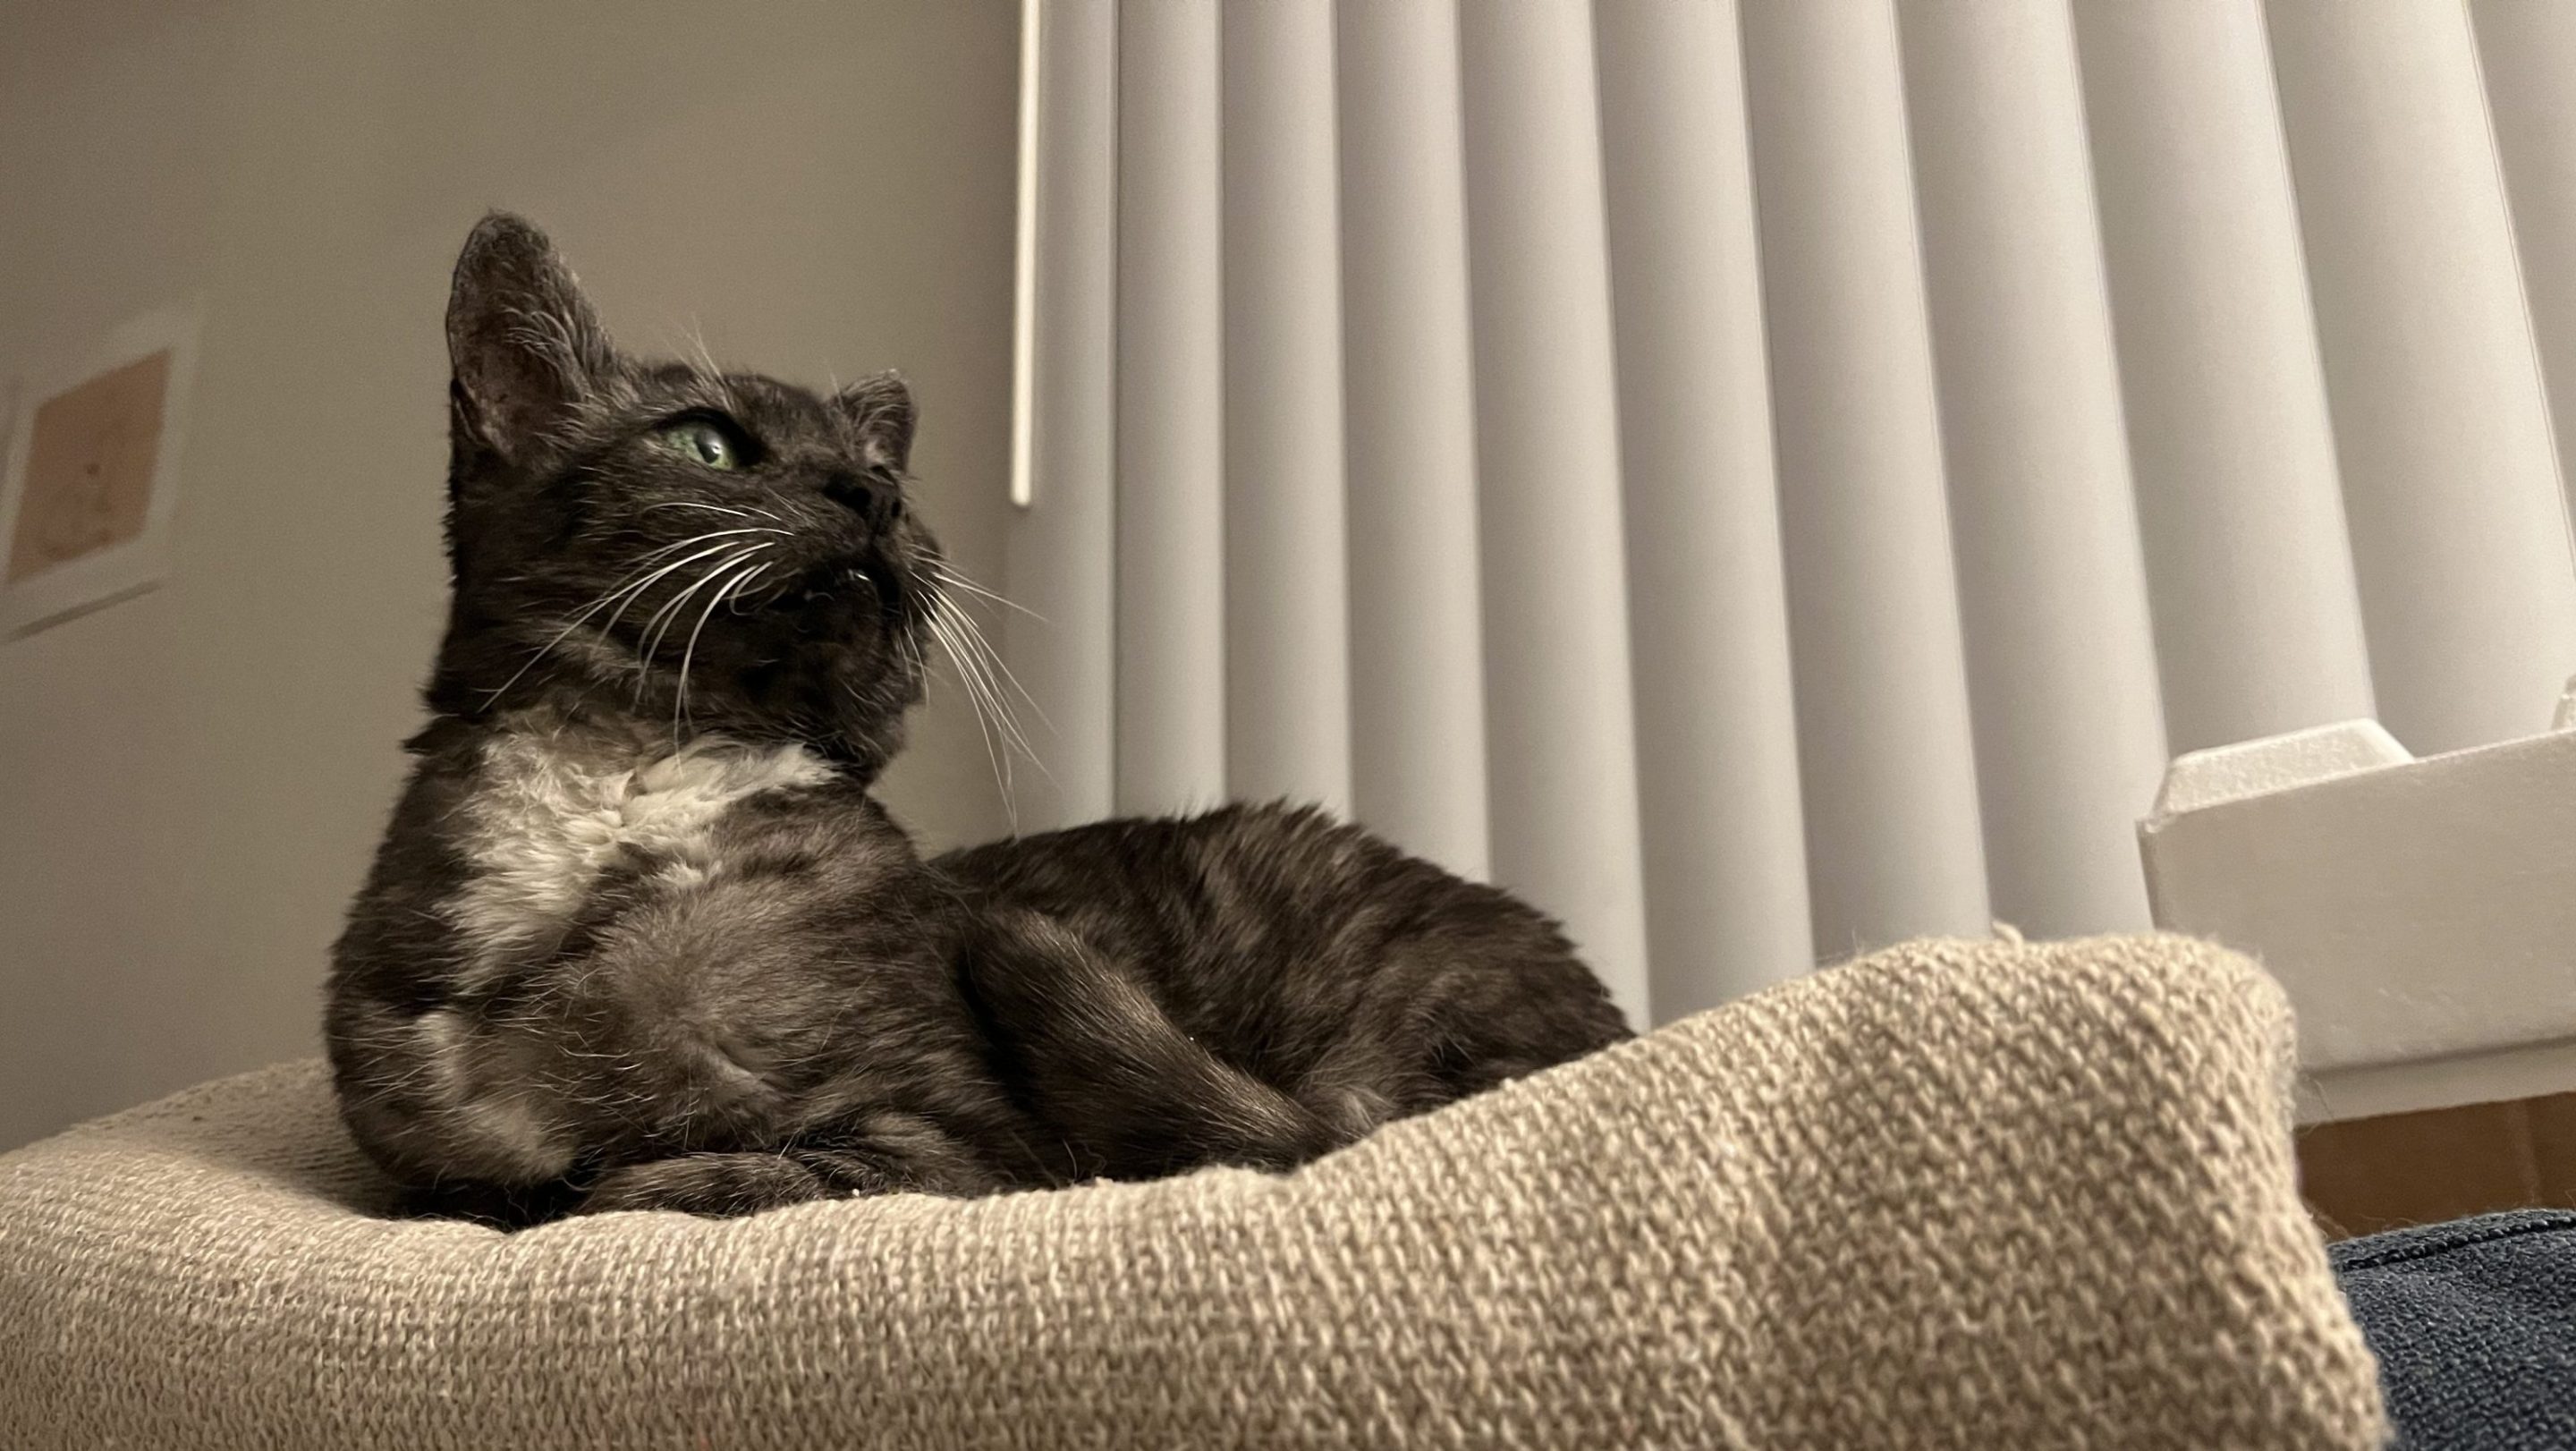 A photo of Lilly the cat. She's smokey with black and white coloring, a little white bib, and green eyes. She's sitting atop a blanket atop our couch looking quite regal.